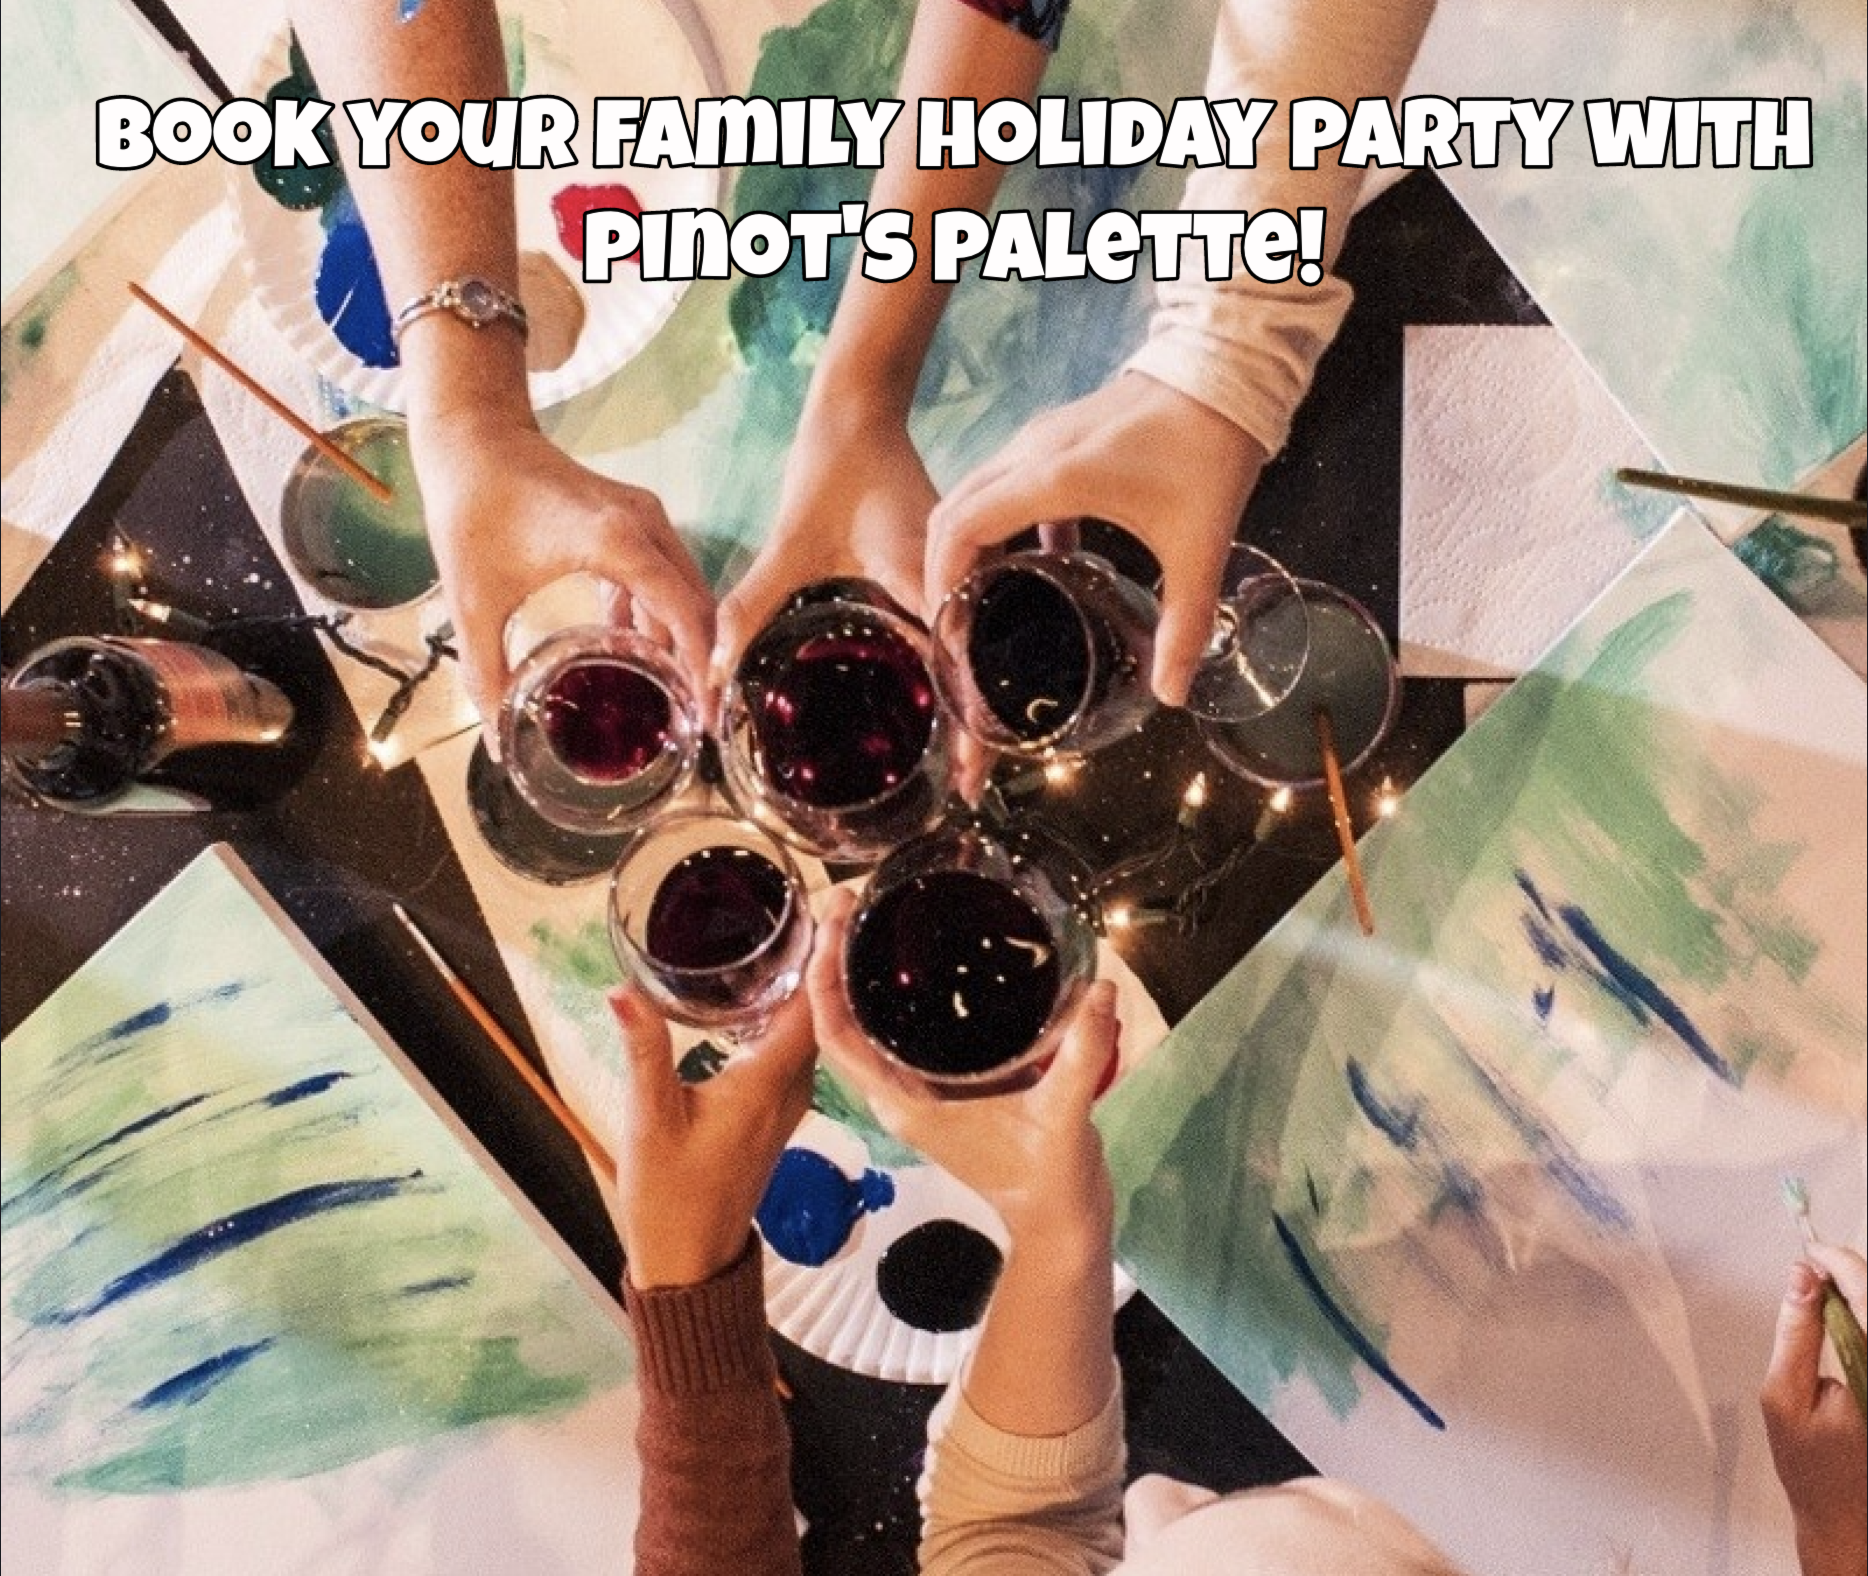 We Love Family Holiday Parties!